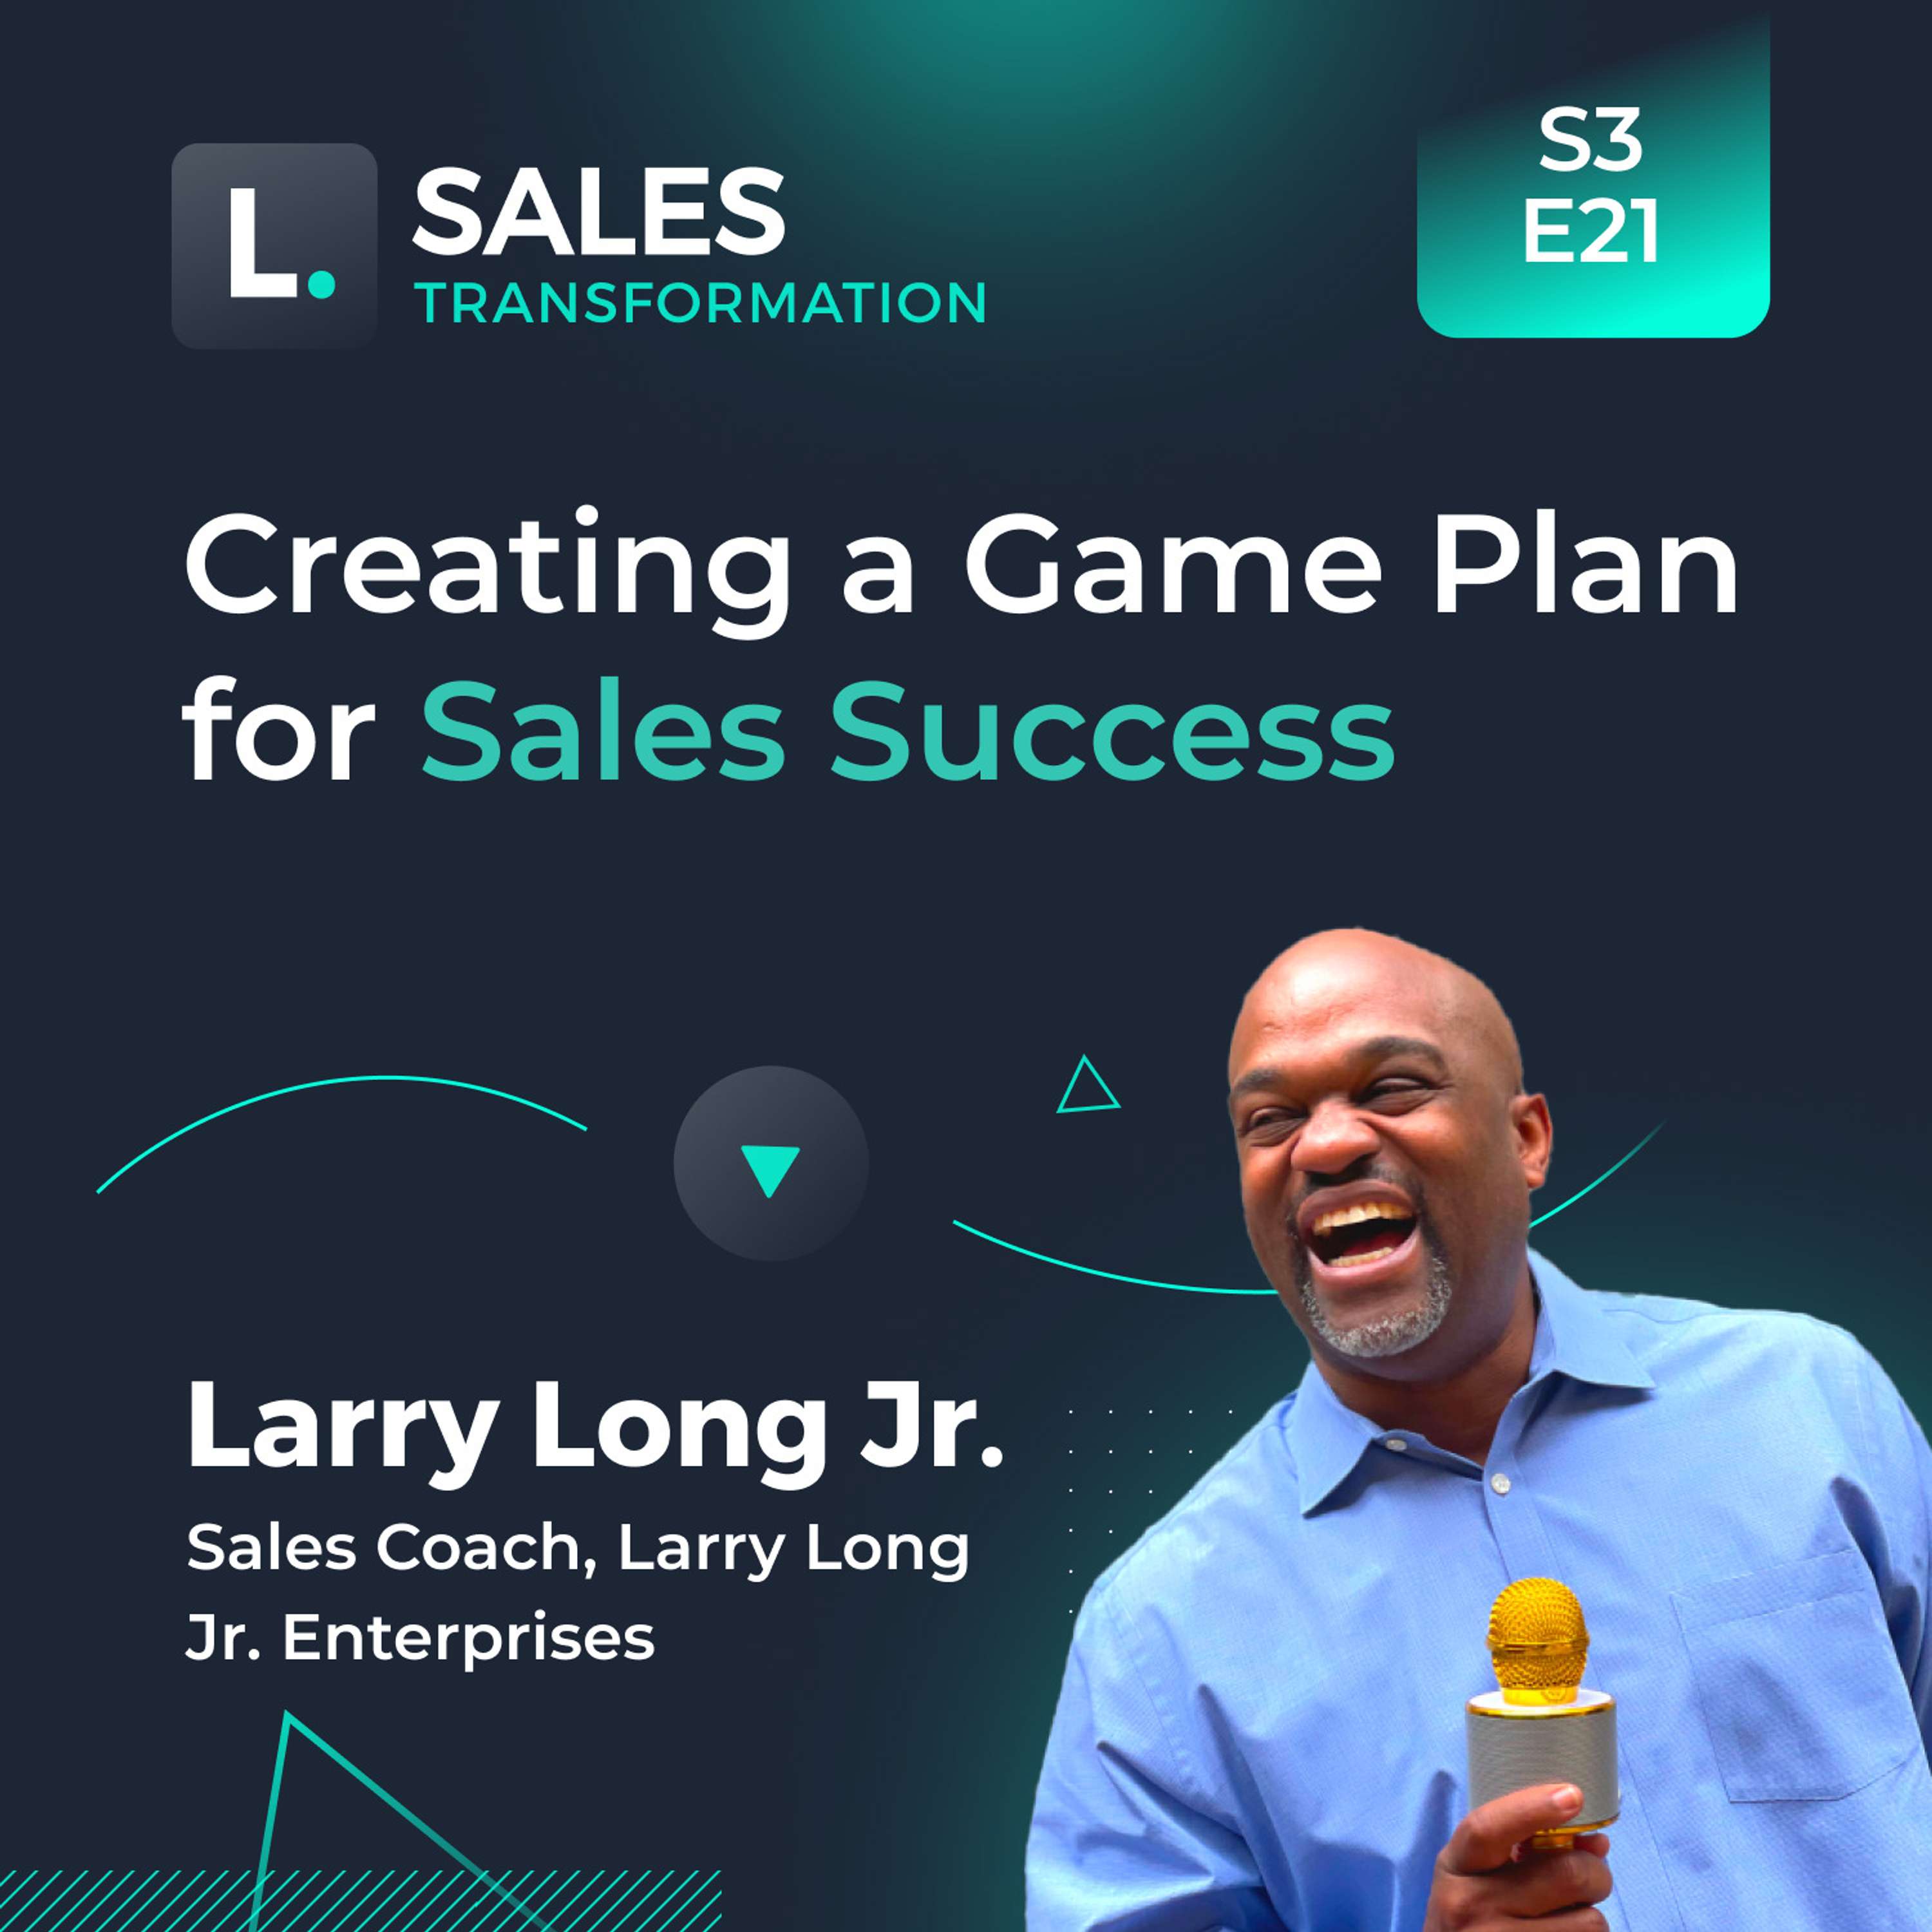 695 - Creating a Game Plan for Sales Success, with Larry Long Jr